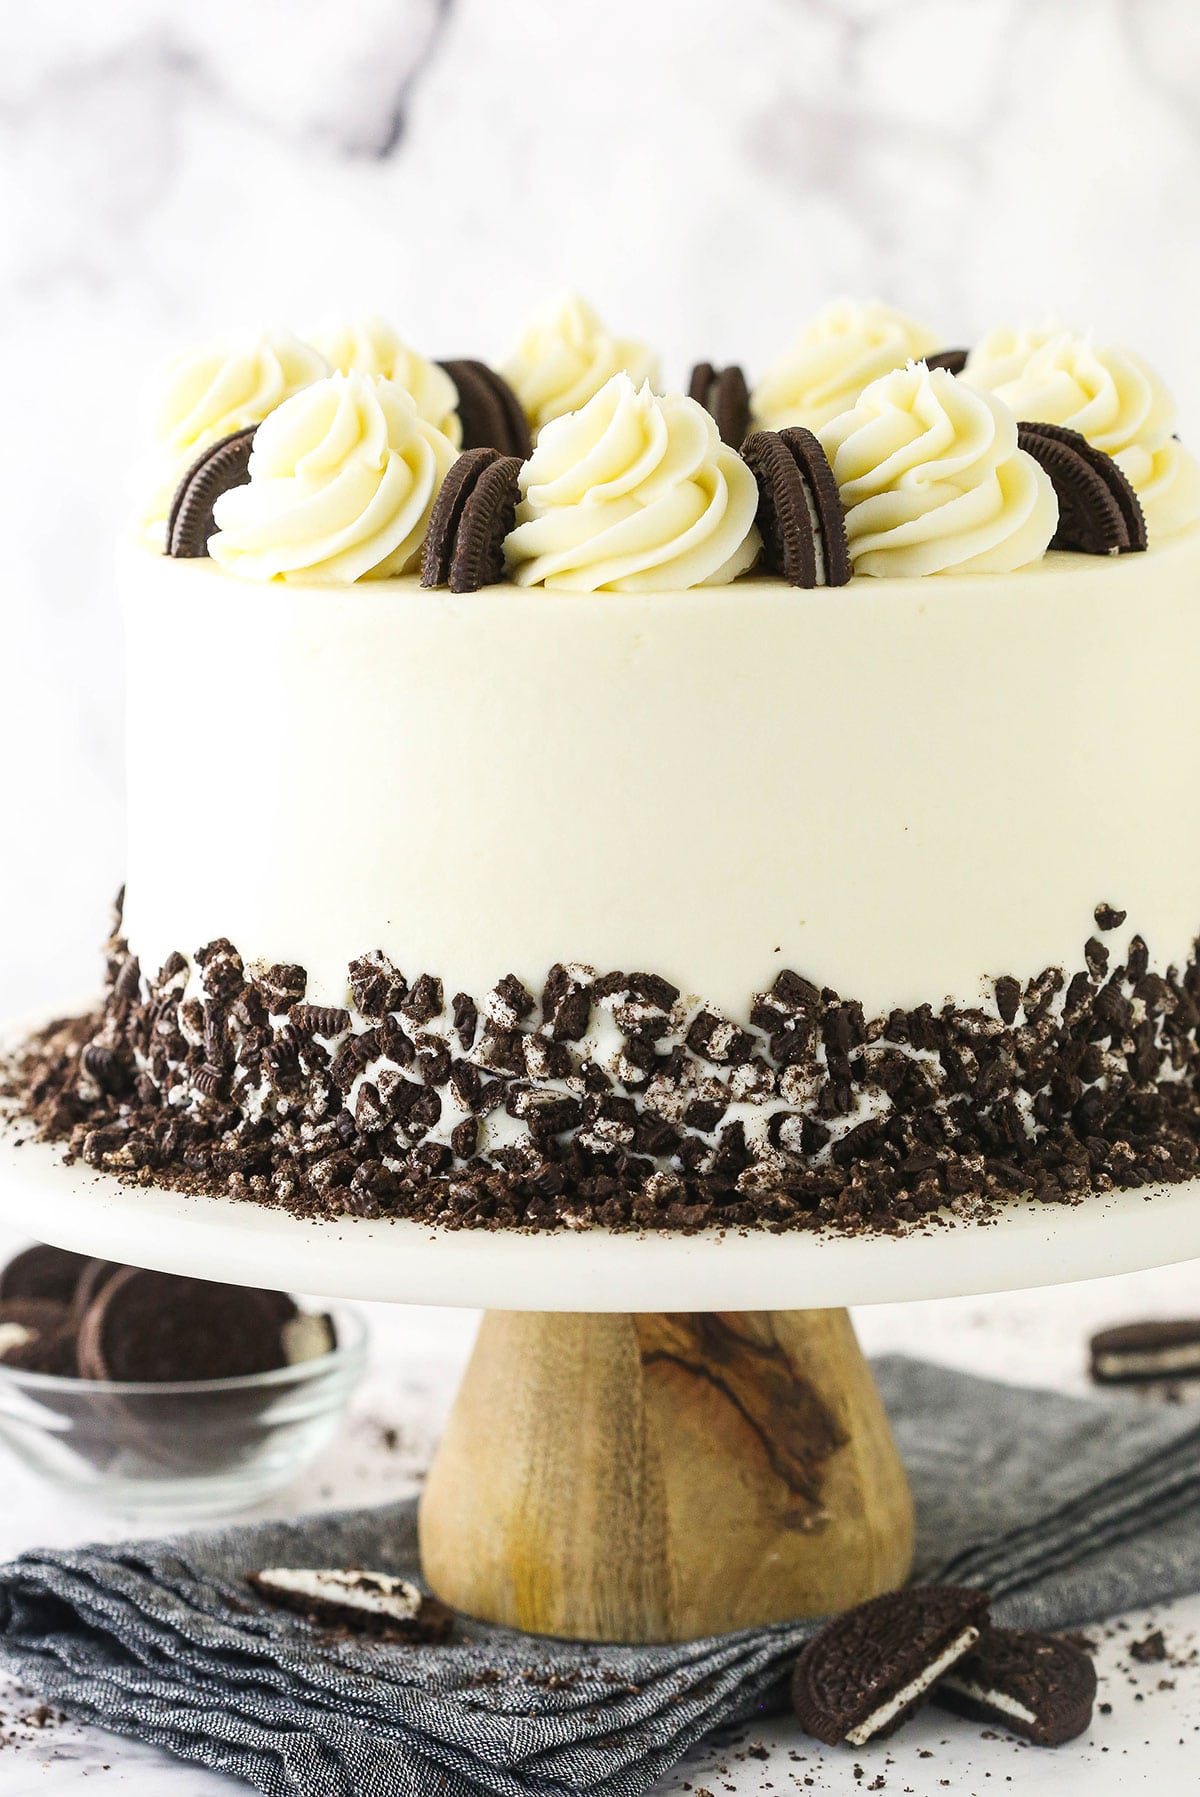 An Oreo layer cake on a wooden cake stand on top of a gray kitchen towel